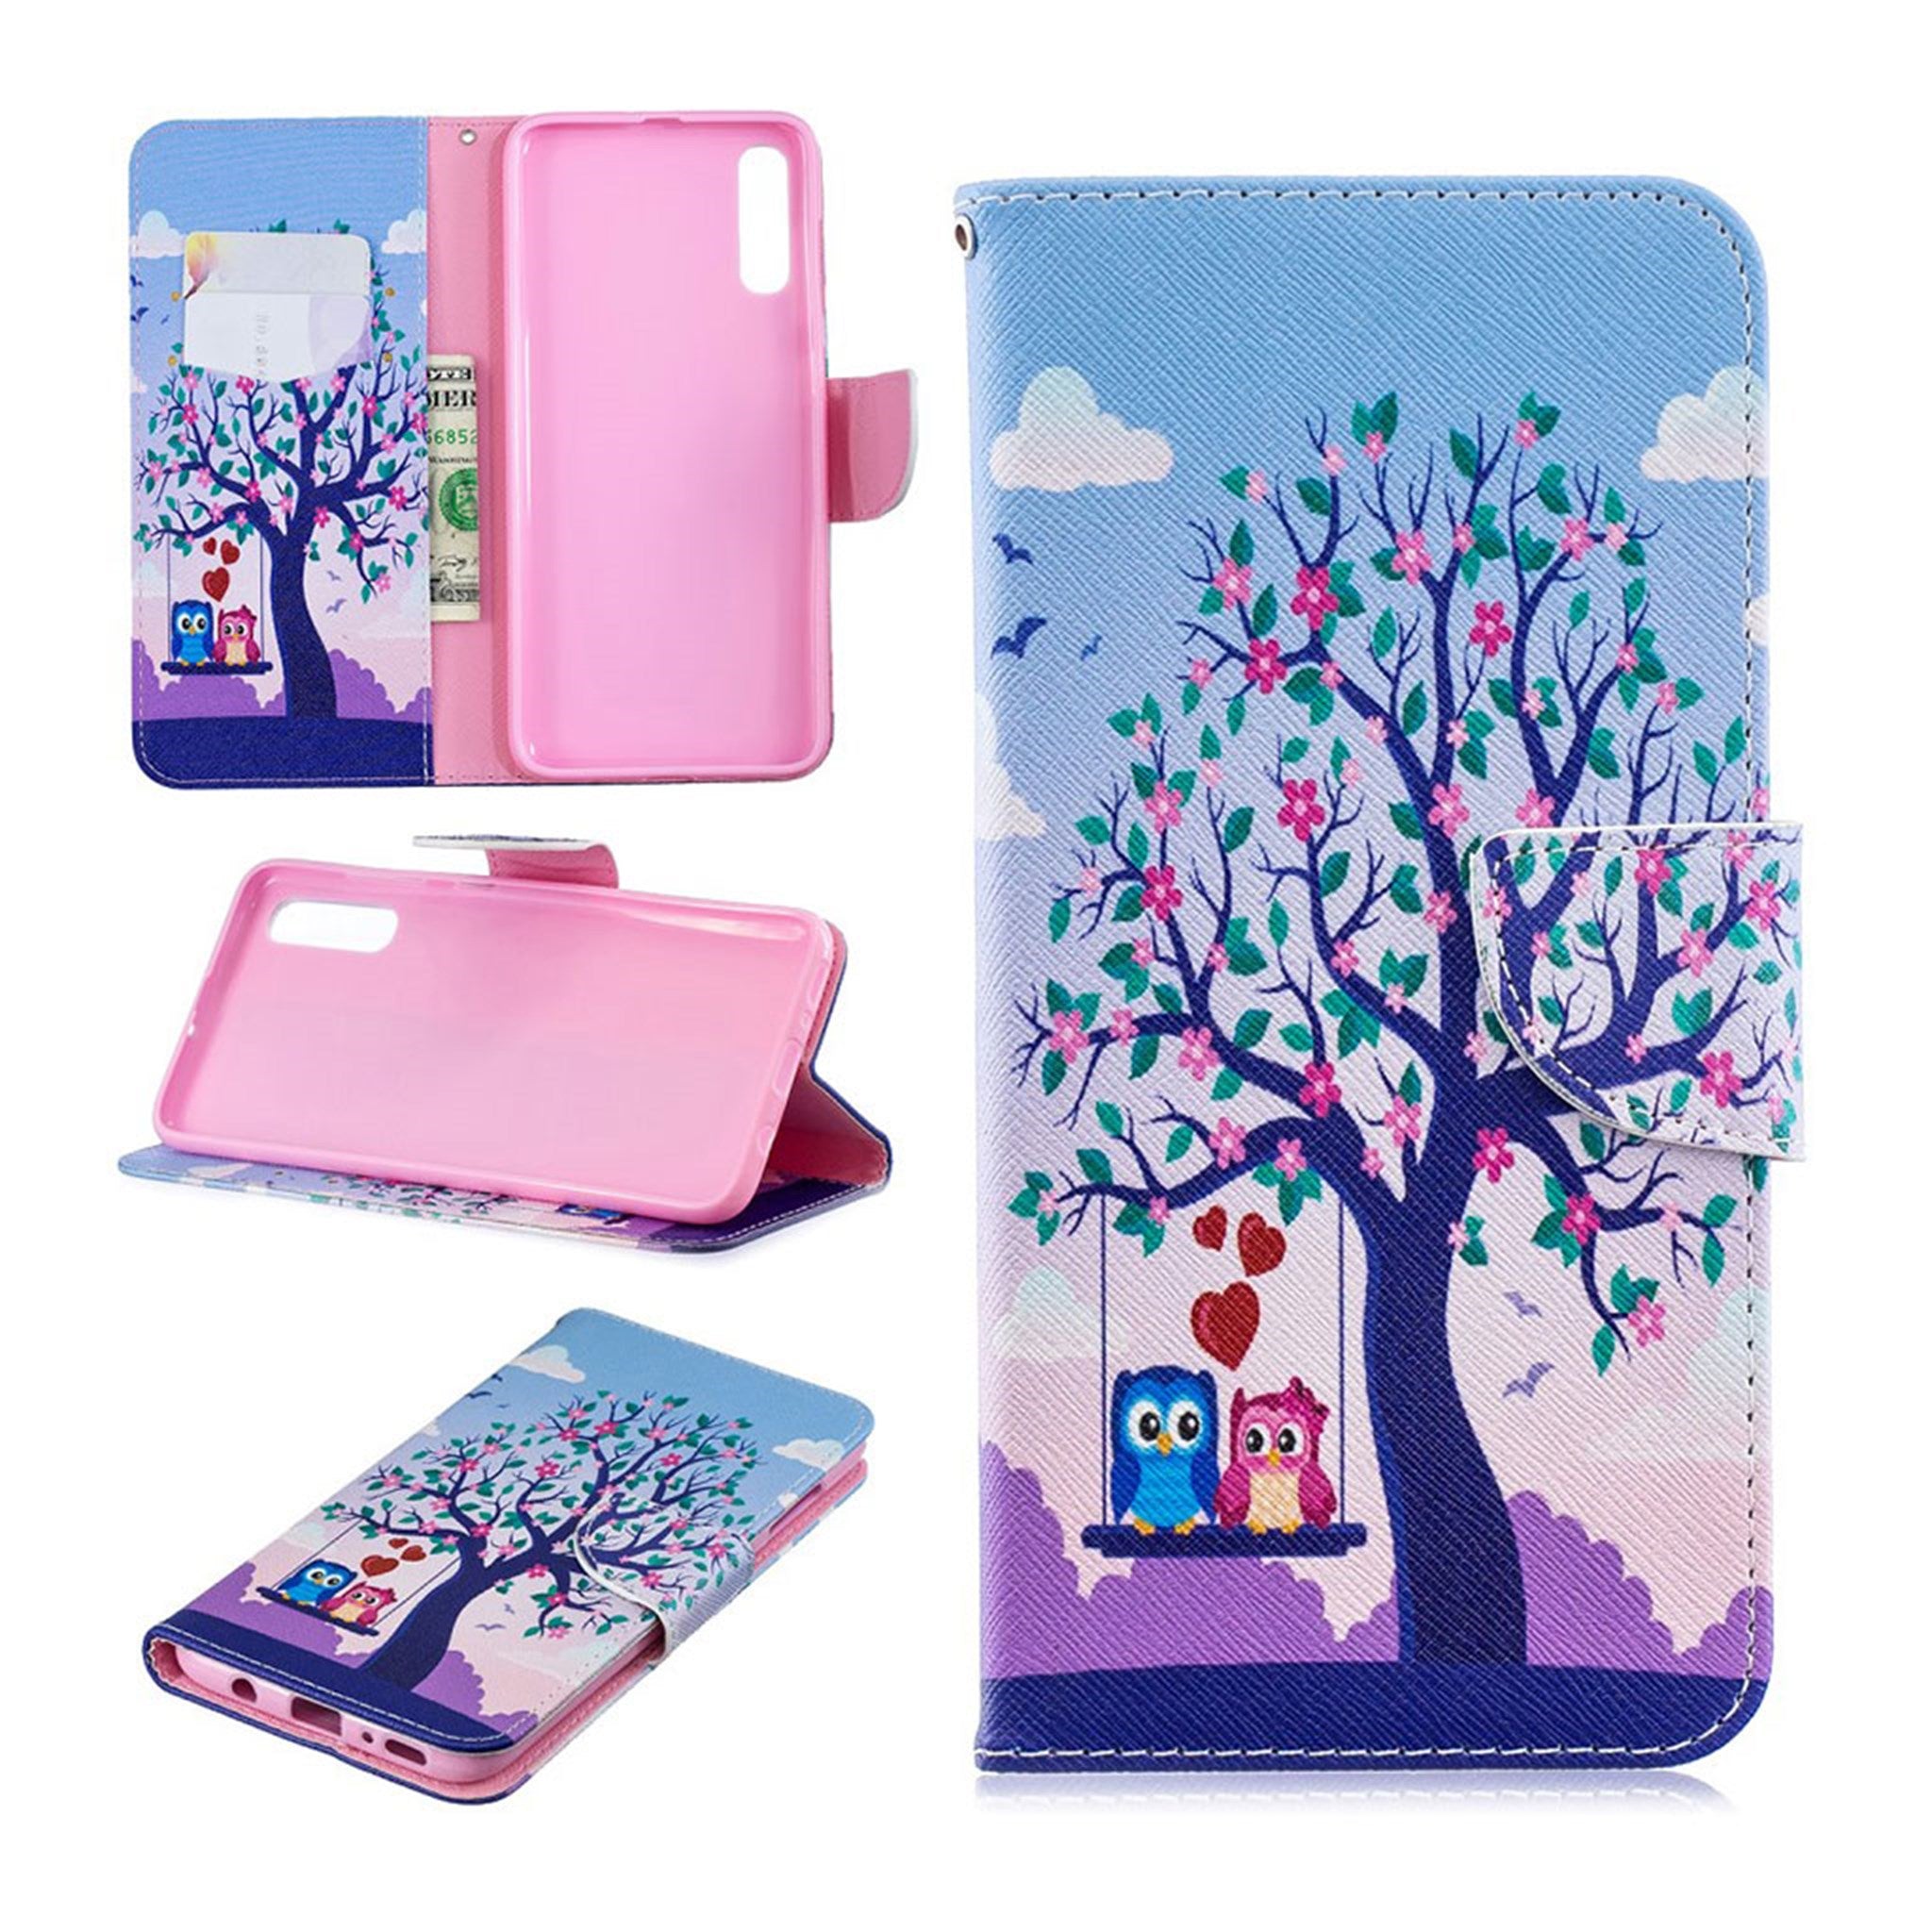 Samsung Galaxy A70 pattern leather case - Tree and Owls